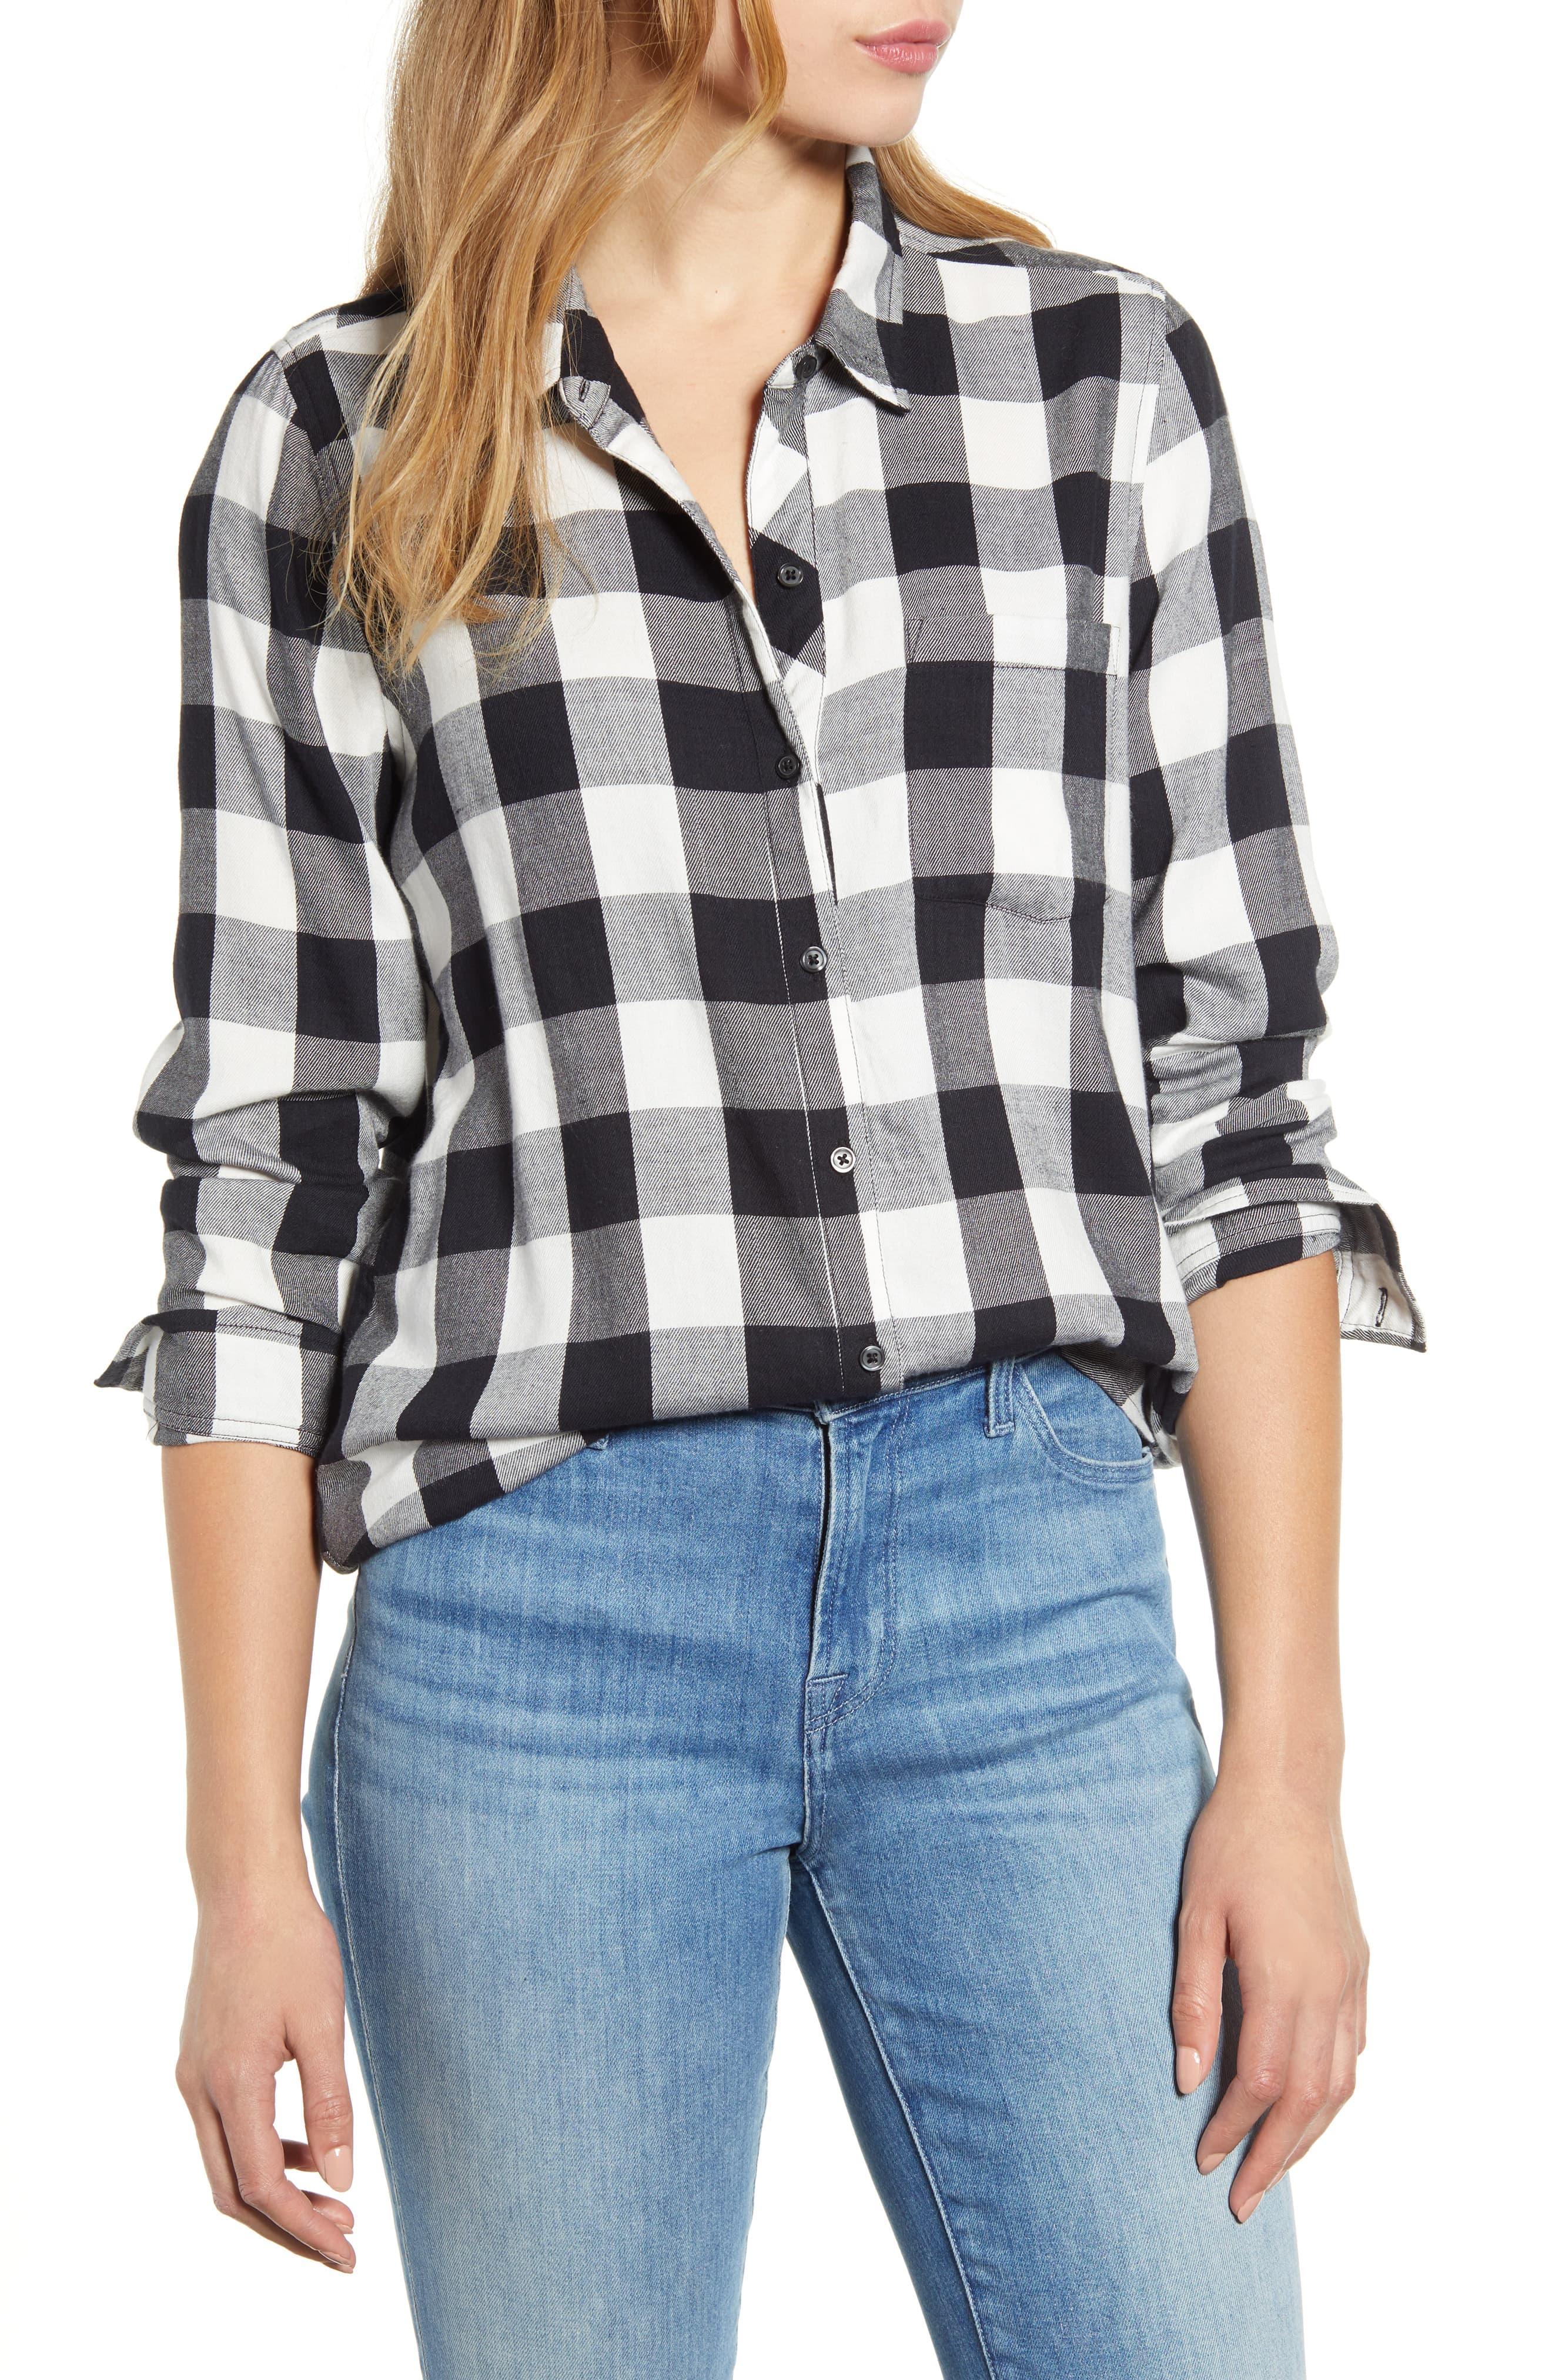 Lucky Brand Cotton Classic One-pocket Plaid Shirt in Black - Lyst